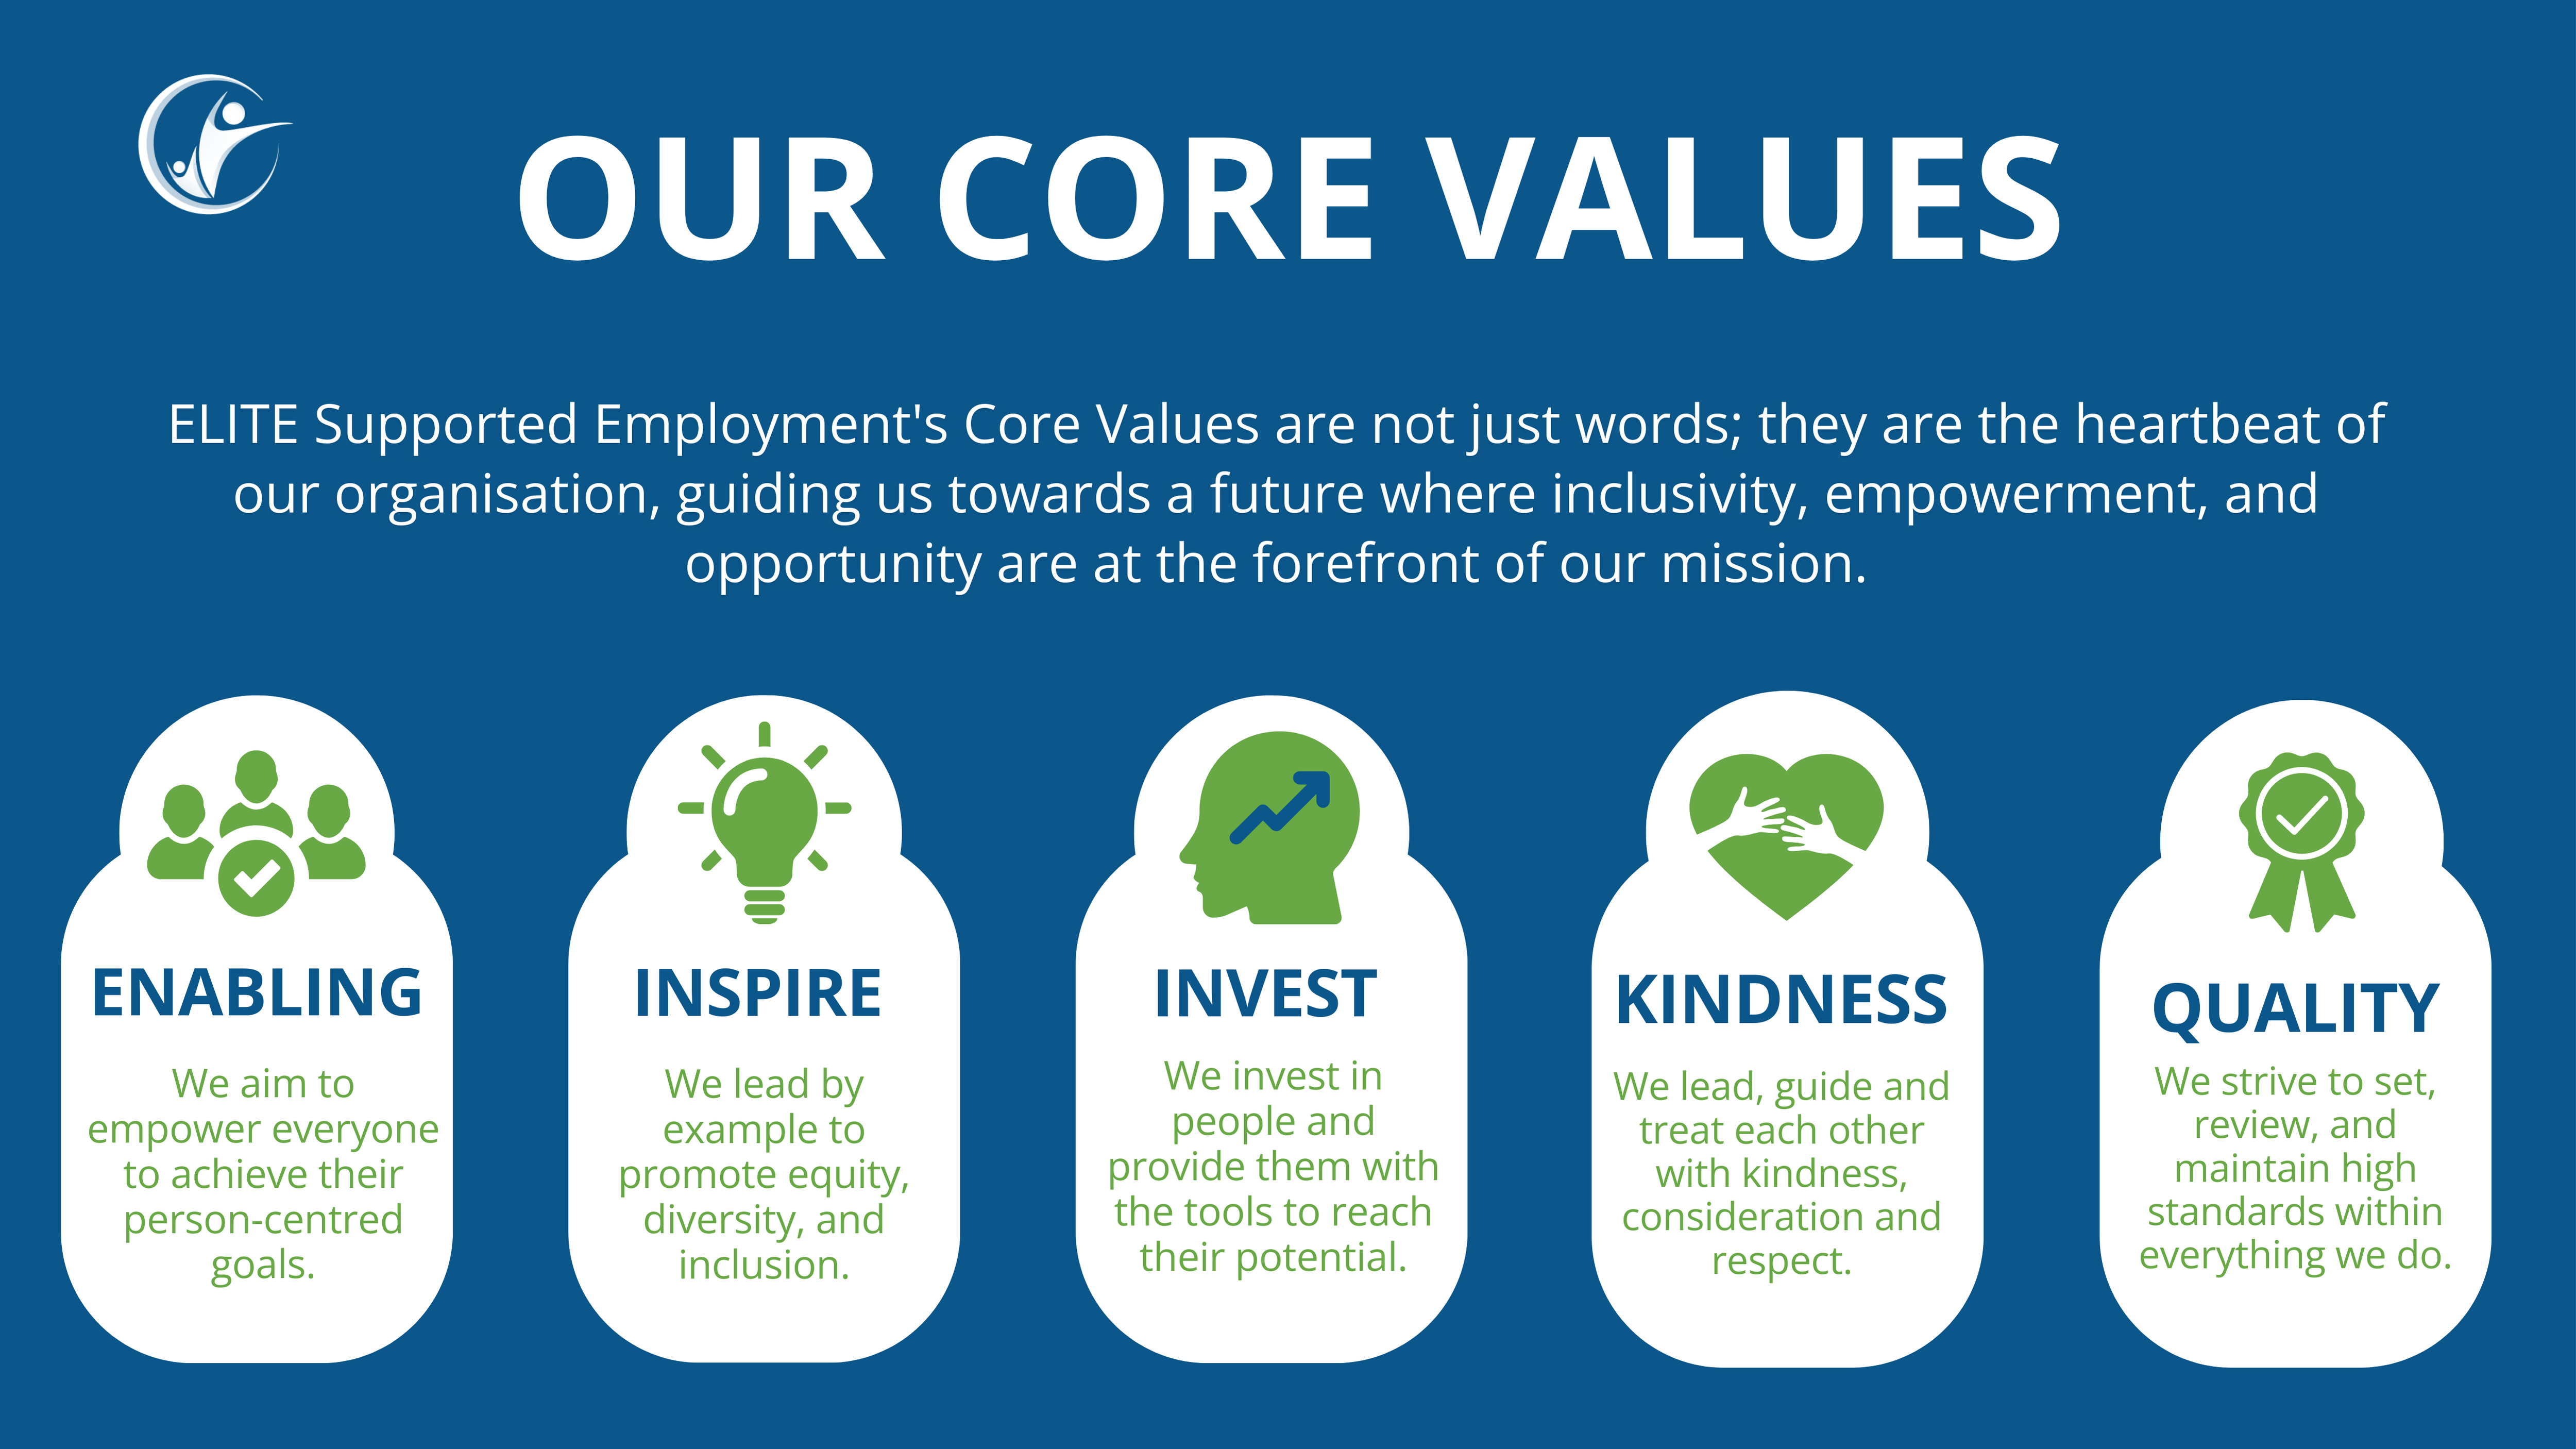 ELITE's Core Values are not just words. They are the heartbeat of our organisation, guiding us to a future where inclusivity, empowerment and opportunity are at the forfront of our missions. The values are: Enabling Inspire Invest Kindness Quality